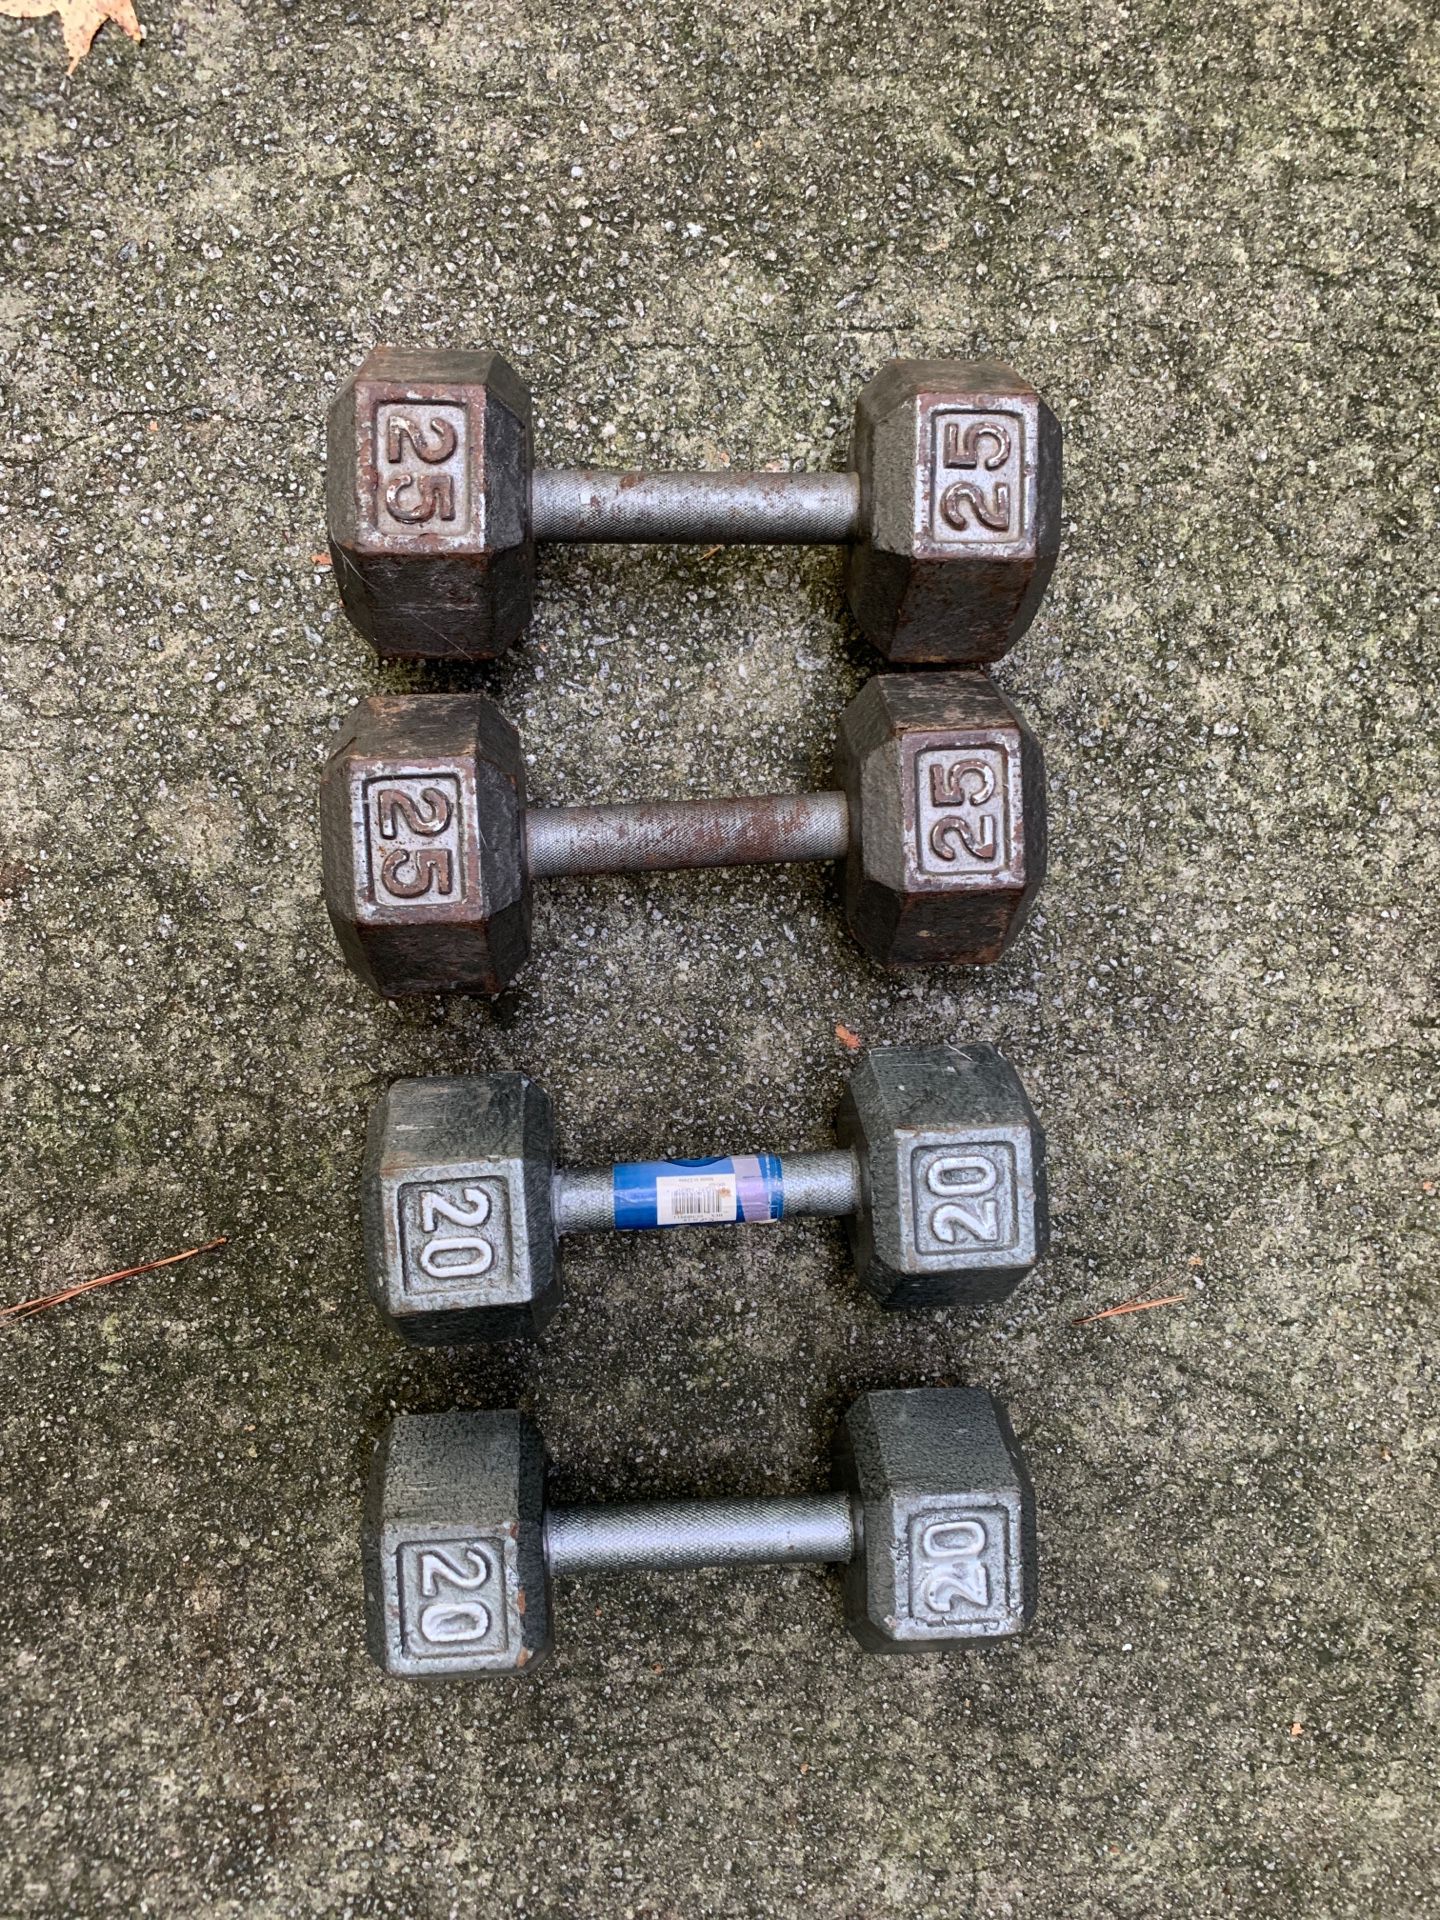 Pairs of 25 and 20 lb dumbbells